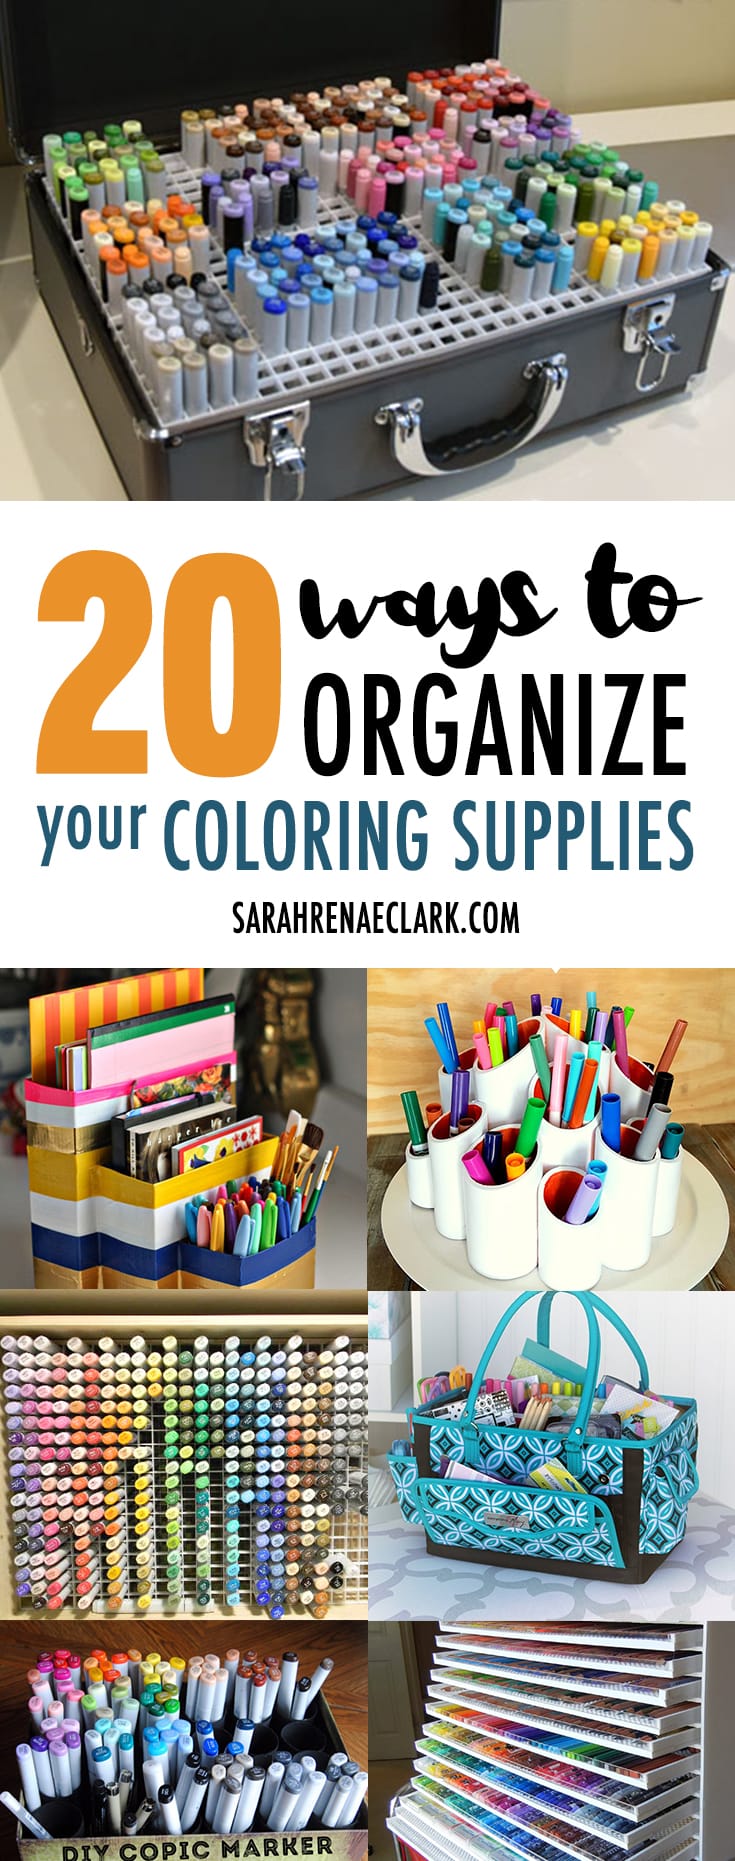 http://sarahrenaeclark.com/wp-content/uploads/2016/11/20-Clever-Ways-to-Organize-Your-Coloring-Supplies-04.jpg